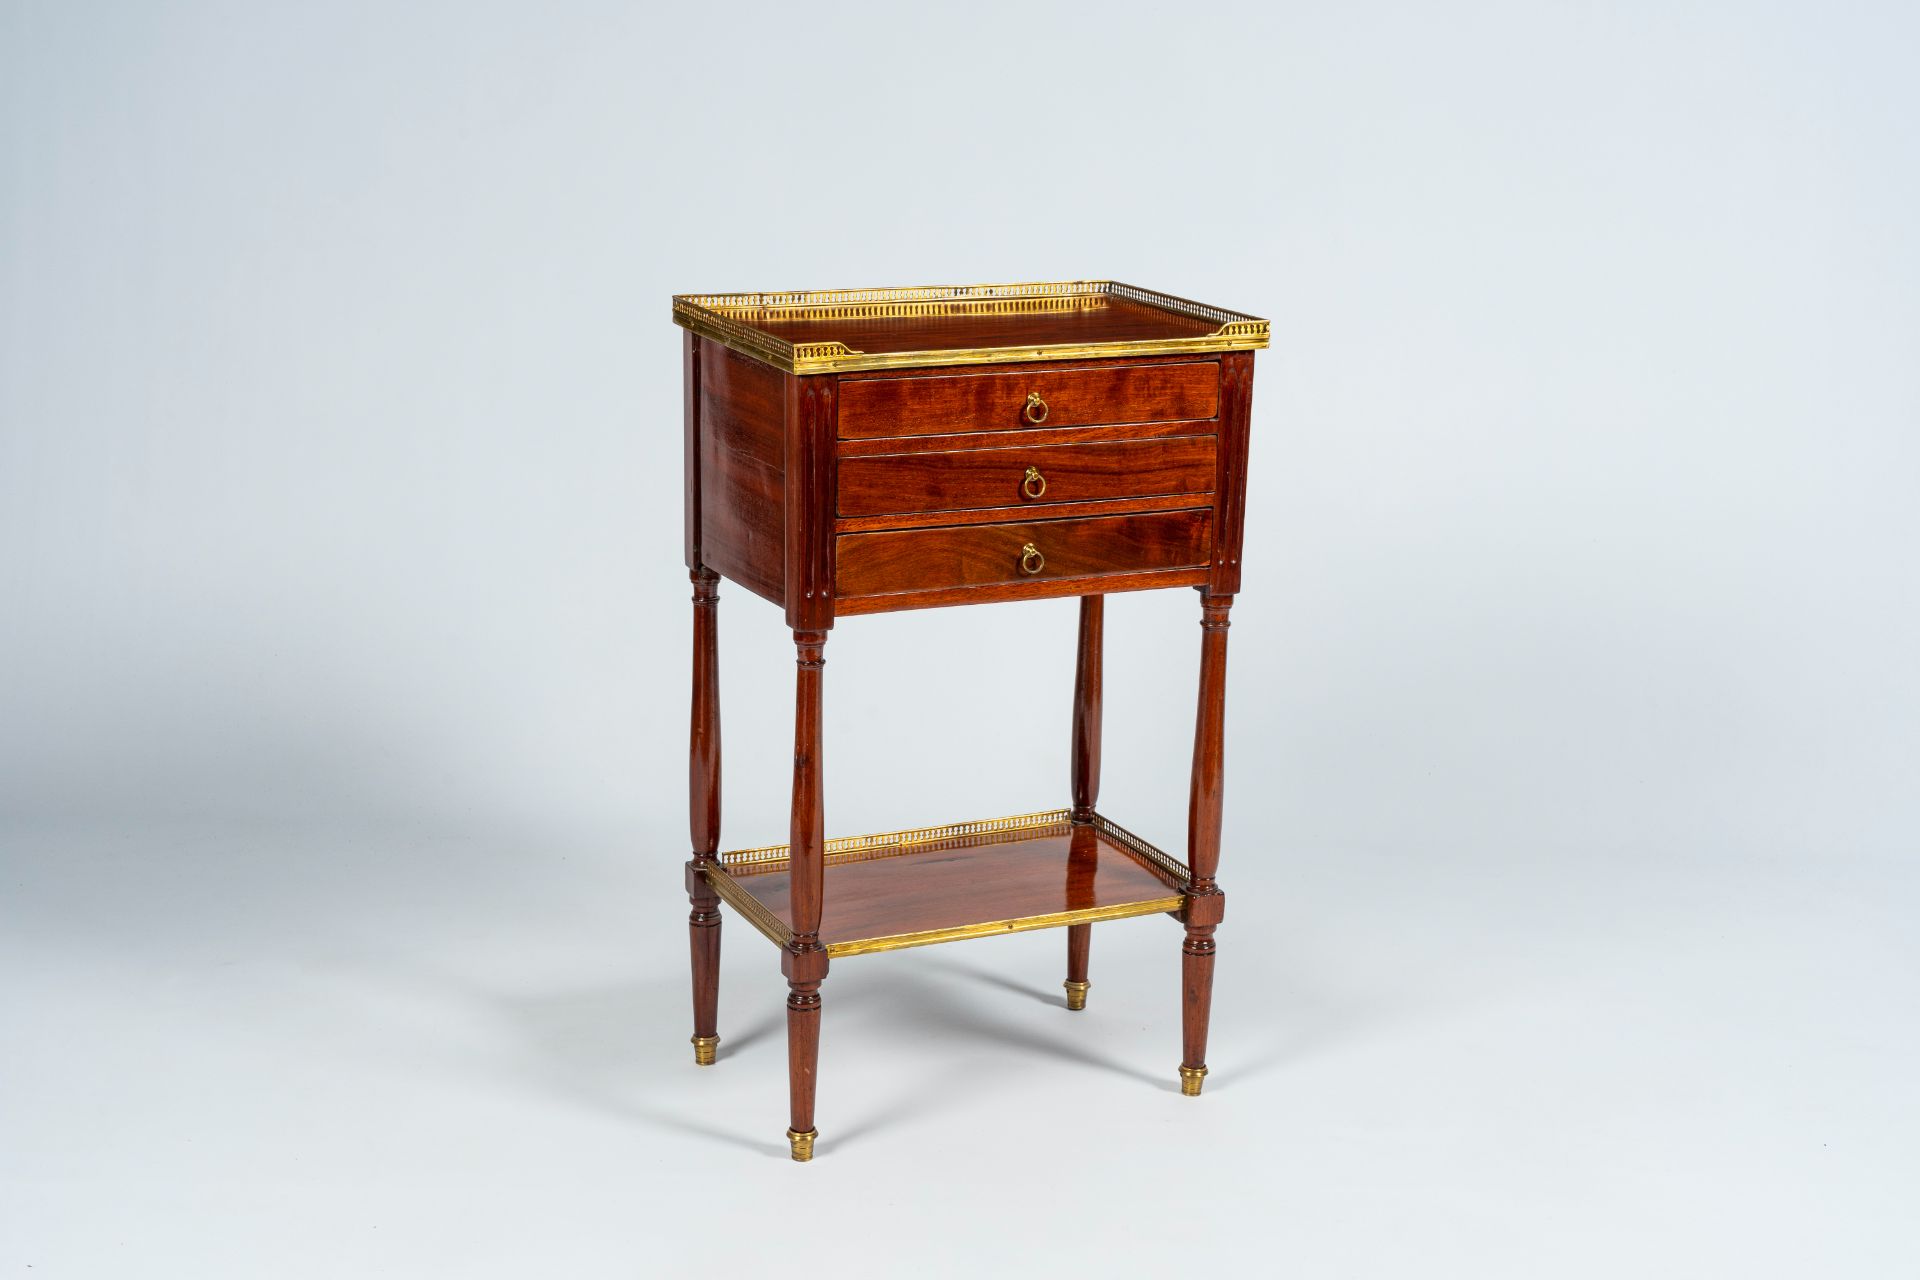 A French mahogany gilt brass mounted side table with three drawers, late 19th C. - Image 2 of 8